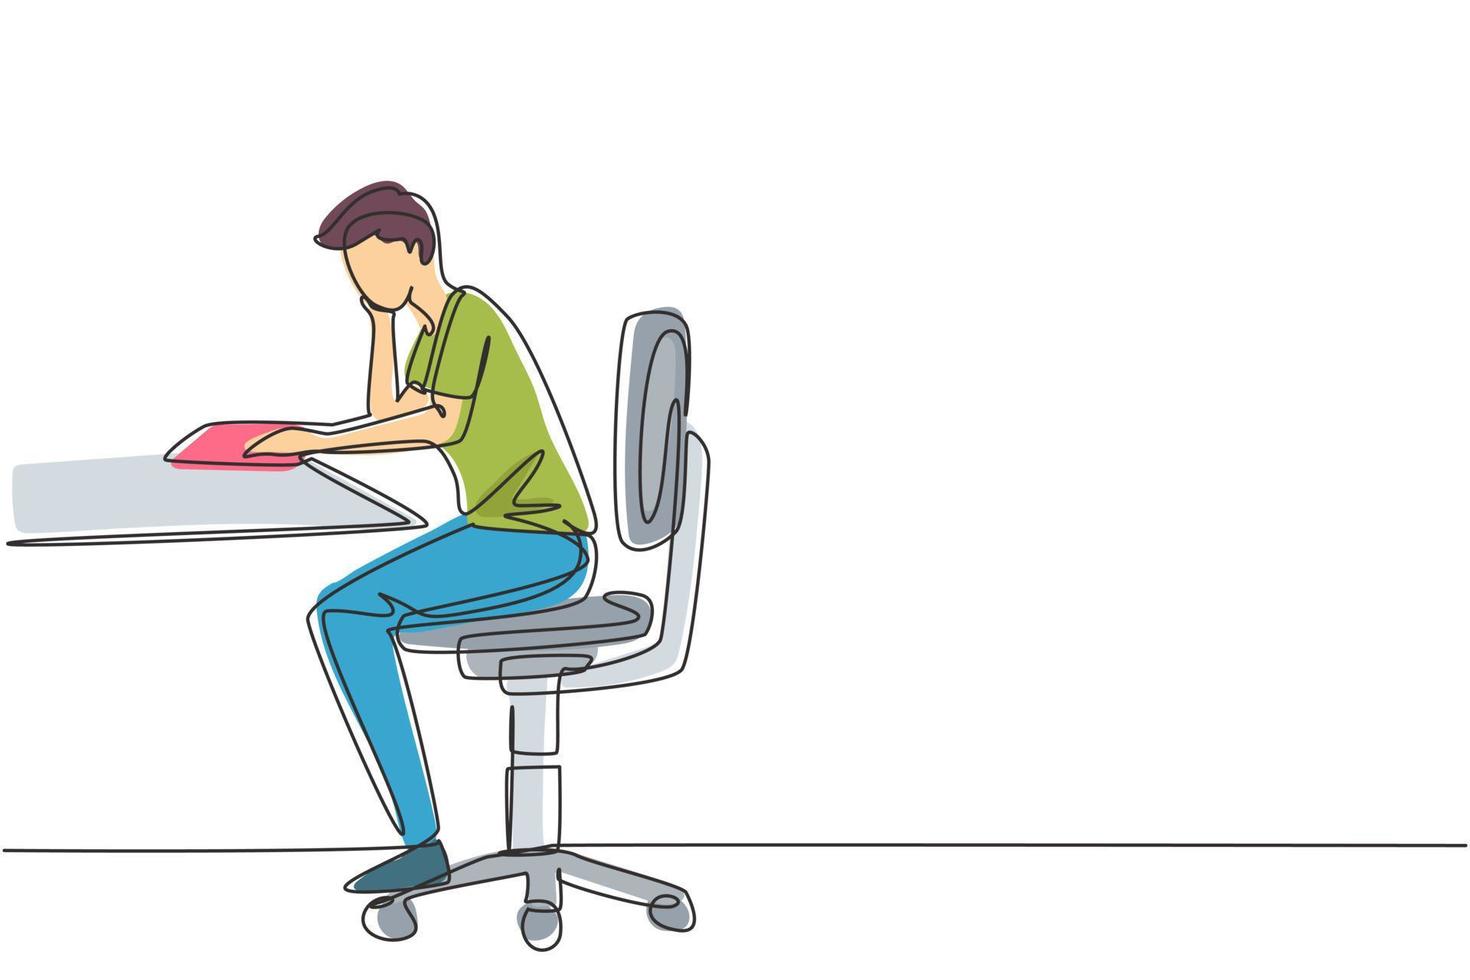 Continuous one line drawing young man reading, learning and sitting on chair around table. Study in library. Intelligent student, education concept. Single line draw design vector graphic illustration